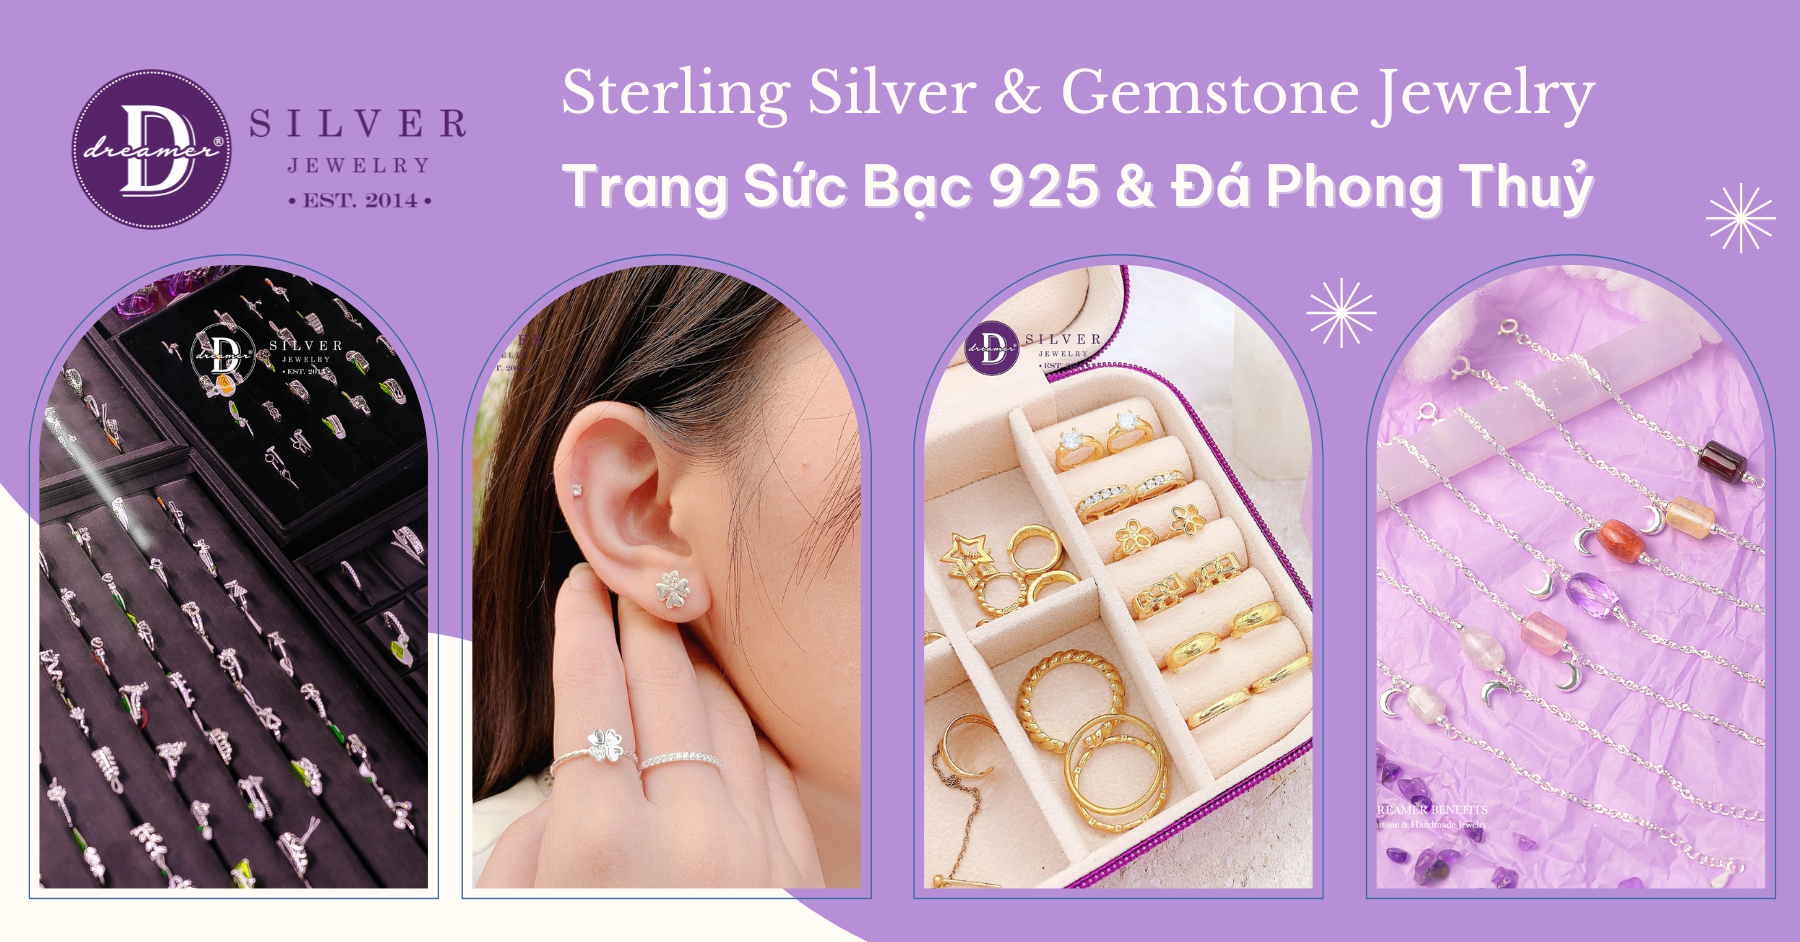 Engravable Jewelry - Handmade Sterling Silver Personalised Jewelry - Trang Sức Khắc Chữ Theo Yêu Cầu